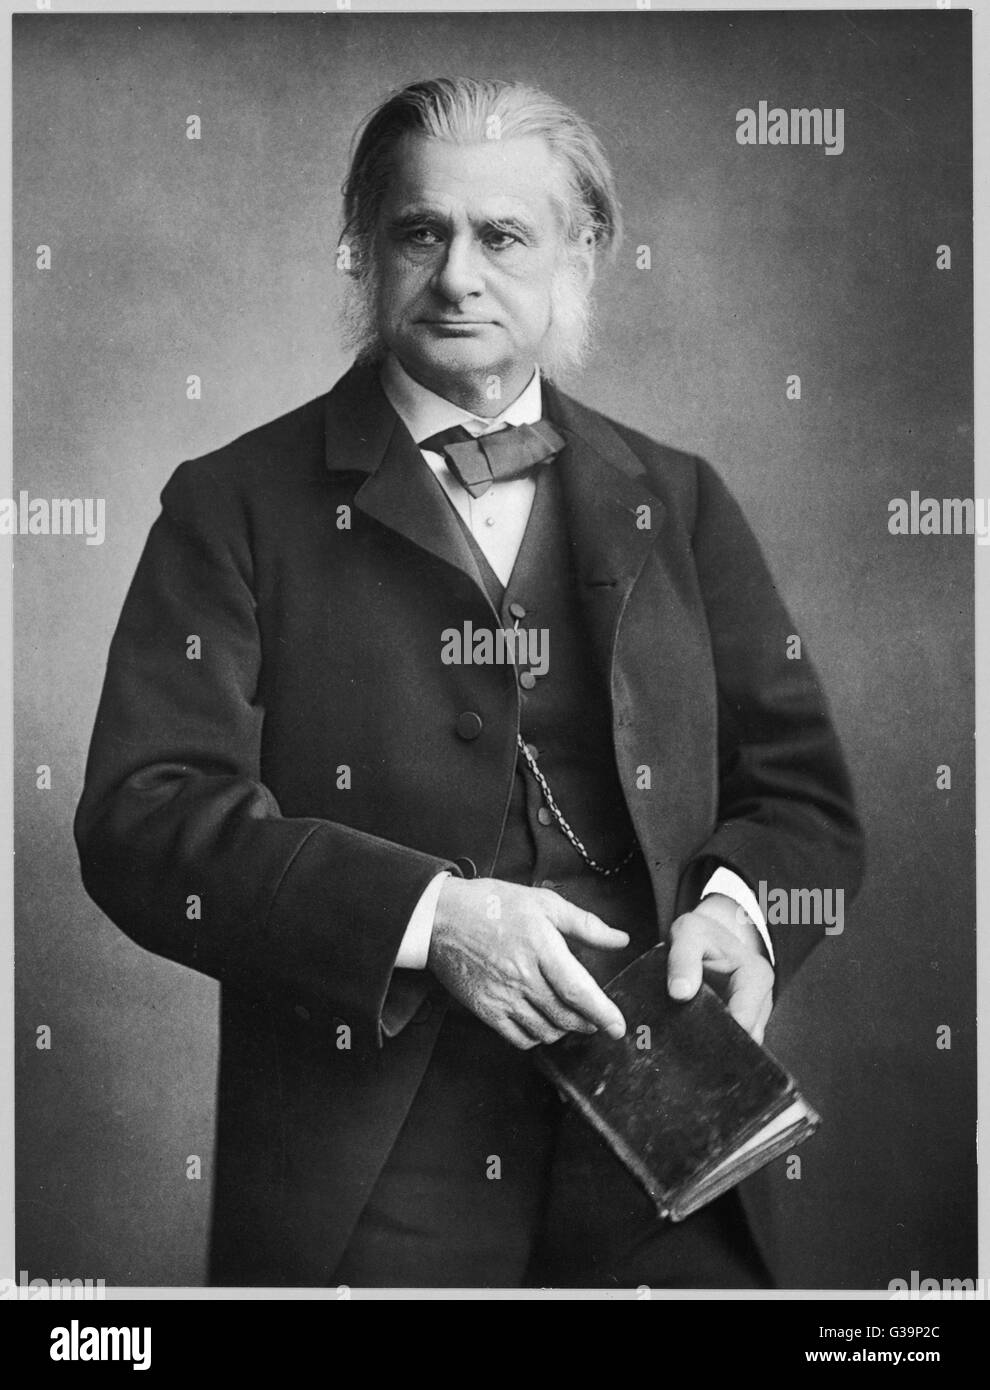 Thomas Henry Huxley (1825-1895) - English Scientist and champion of Darwin's Theory of Evolution      Date: 1889 Stock Photo